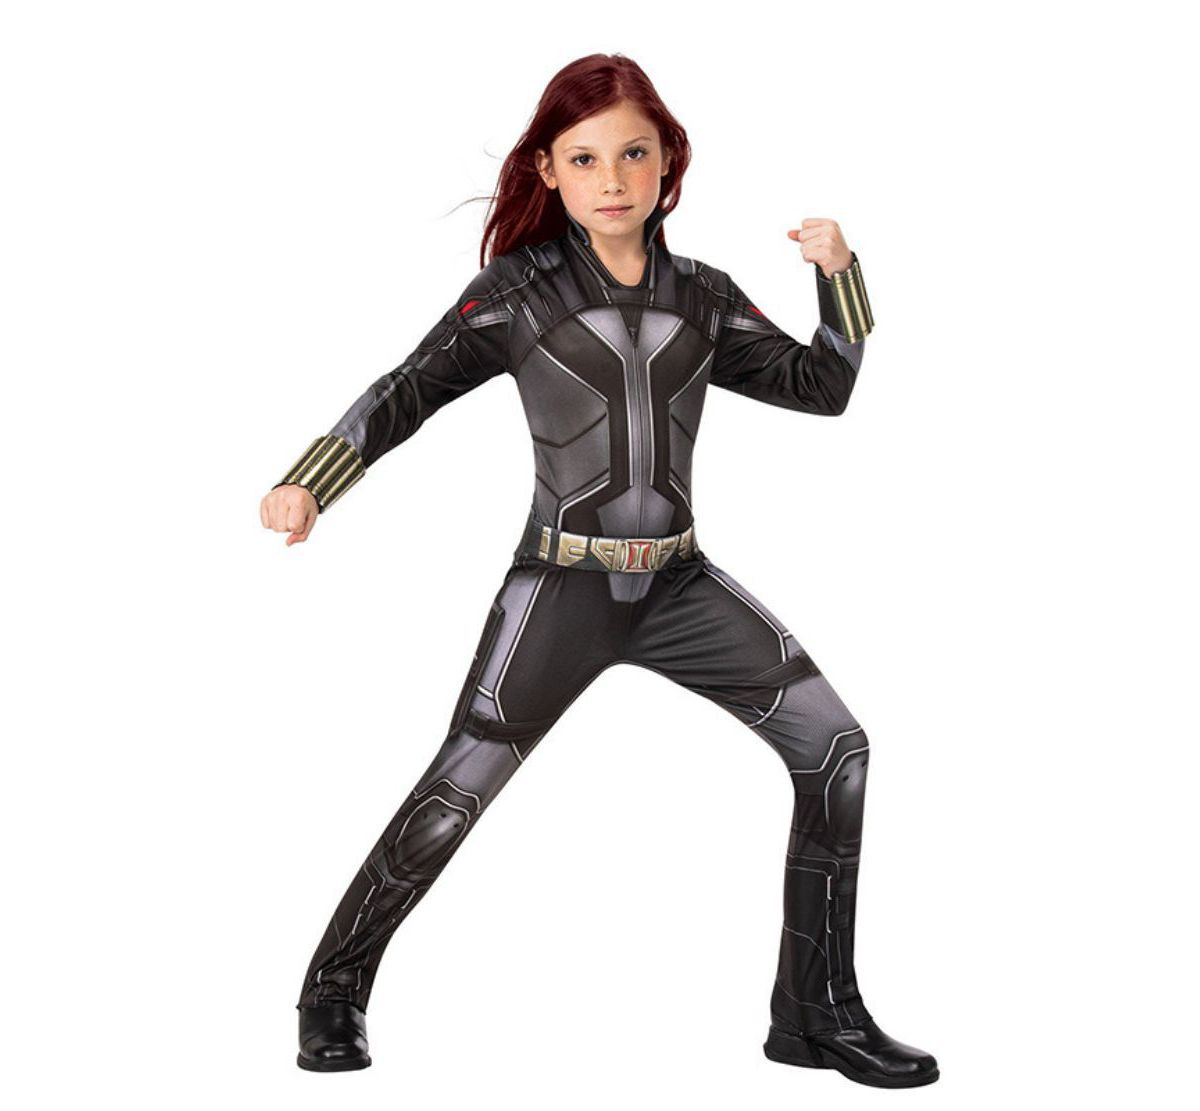 New Black Widow Children And Girls Game Dress Up Costumes For Halloween Party Cosplay YAOQIANSHU